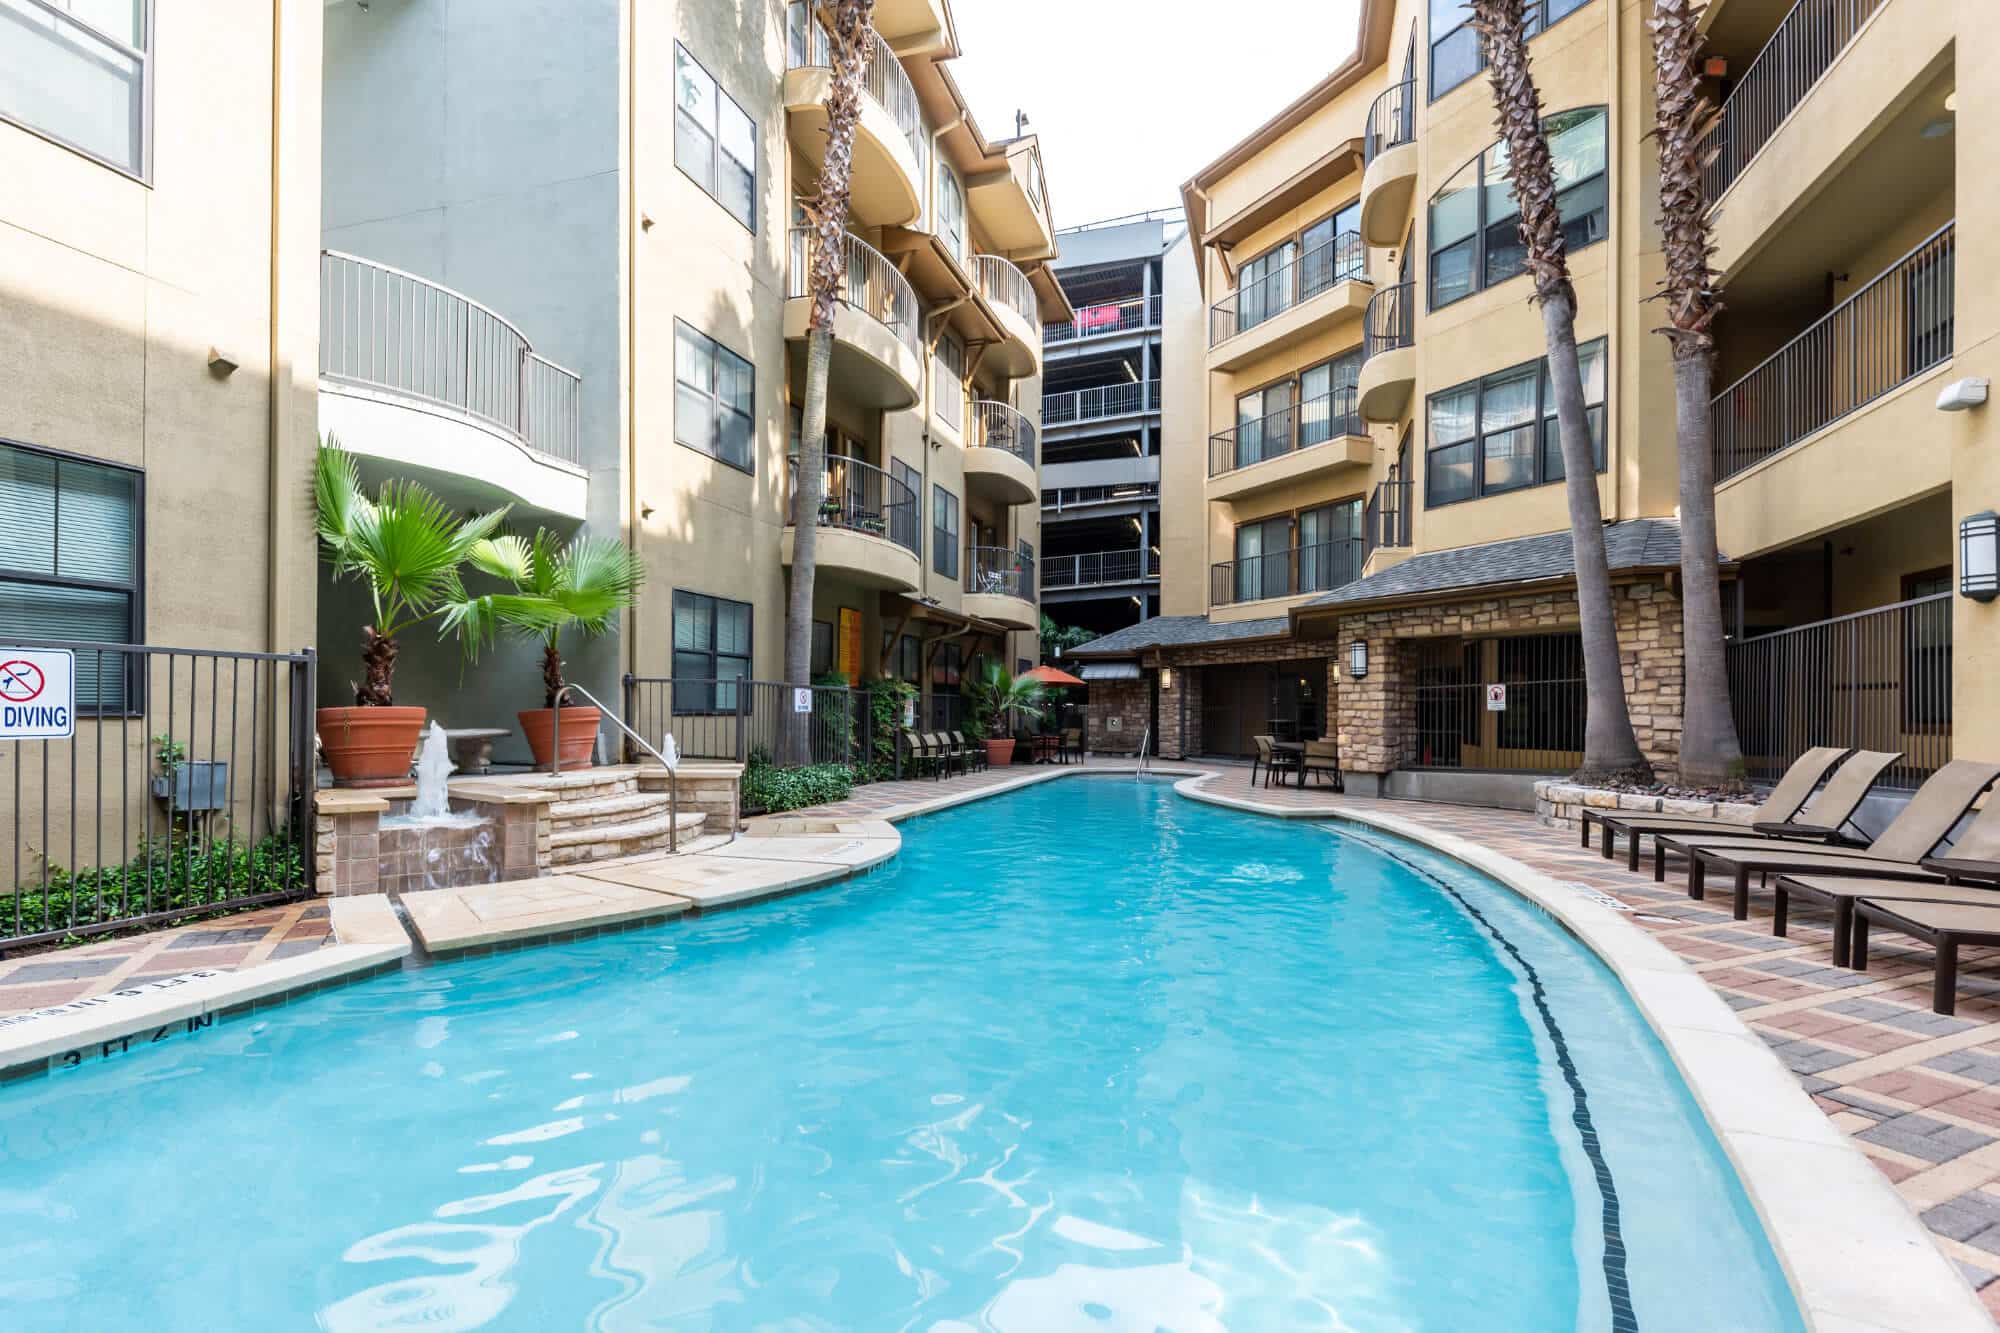 villas on guadalupe off campus apartments near ut austin swimming pool